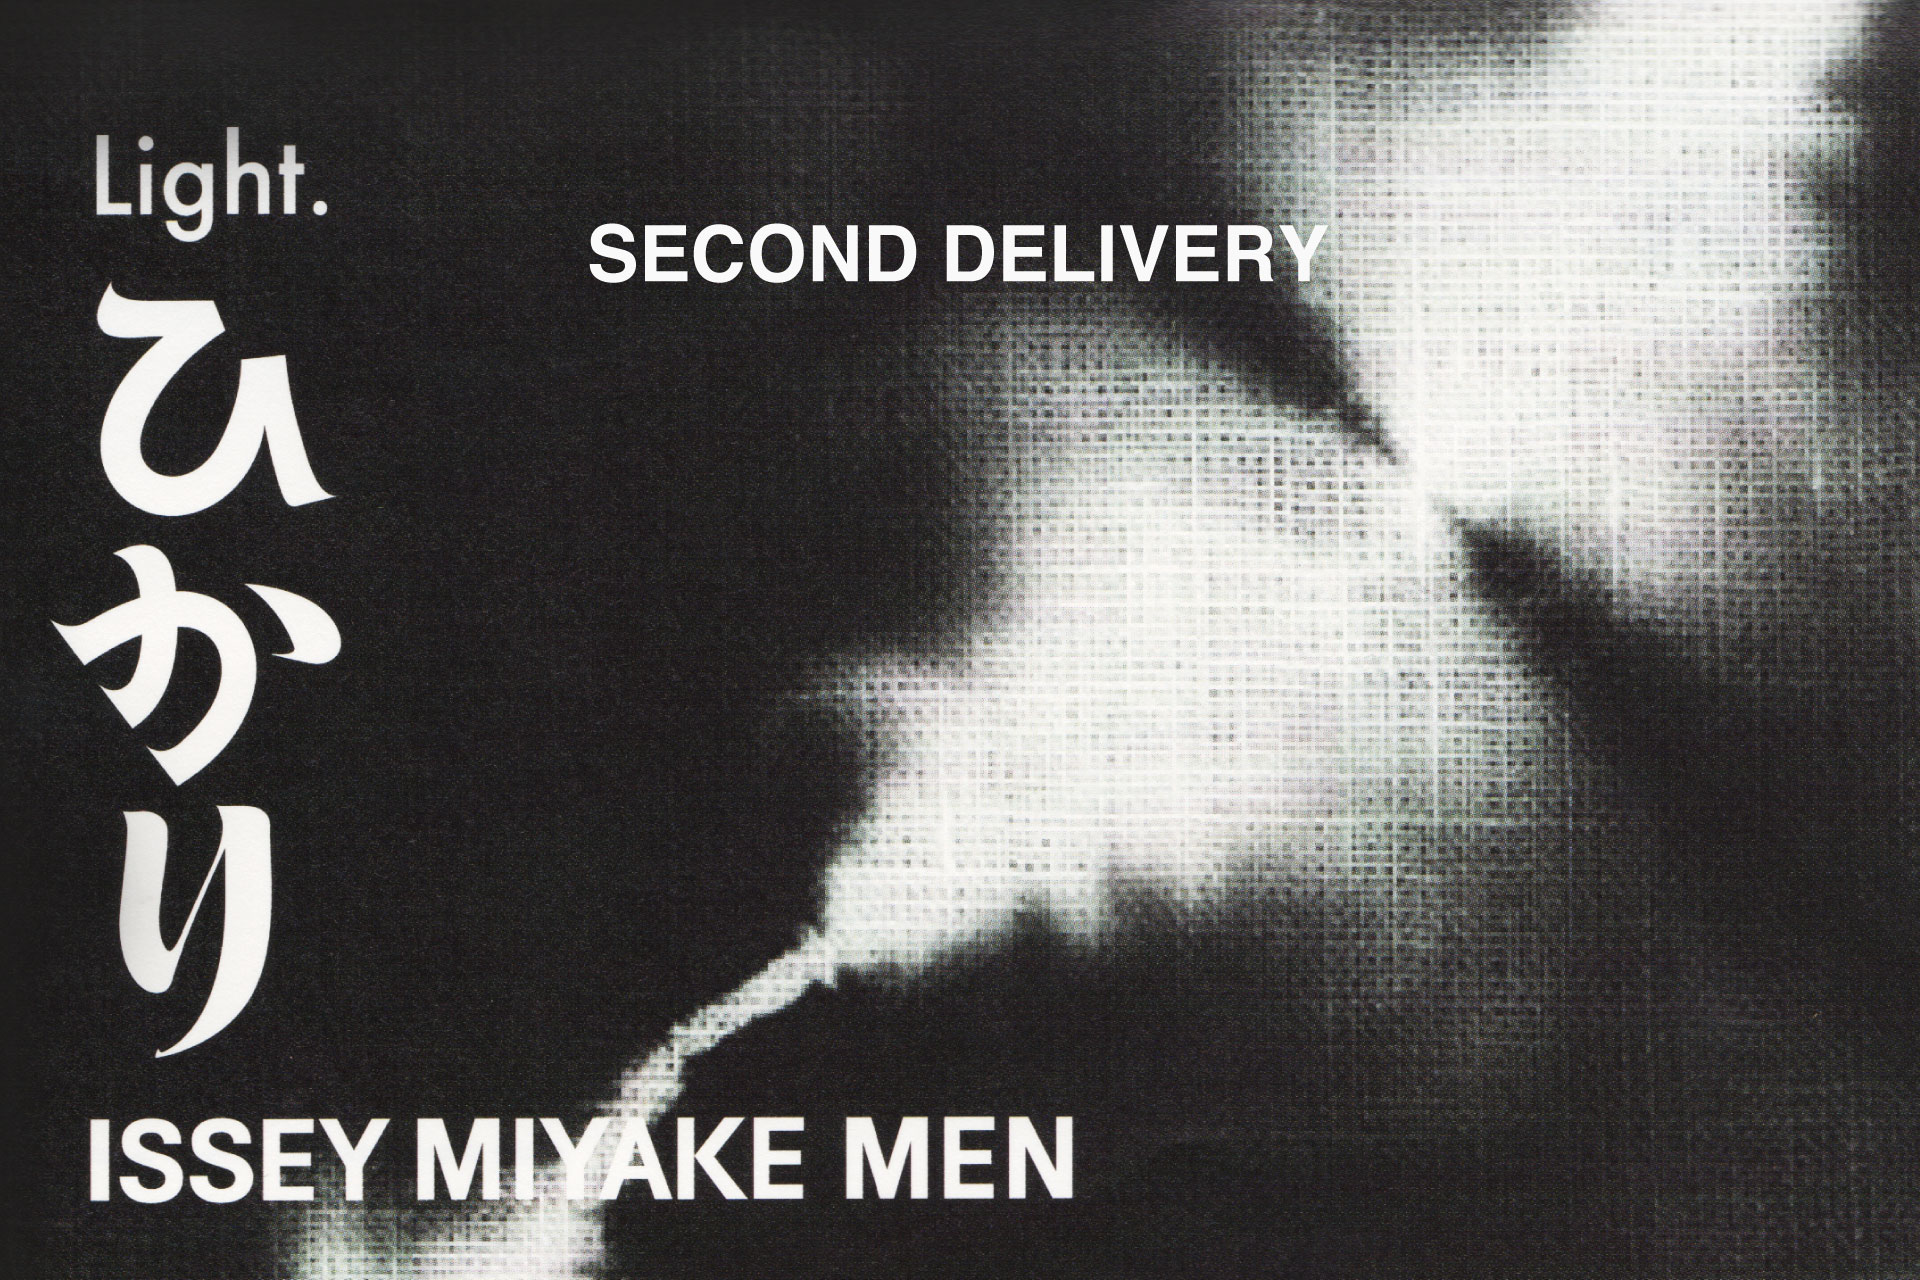 ISSEY MIYAKE MEN SECOND DELIVERY